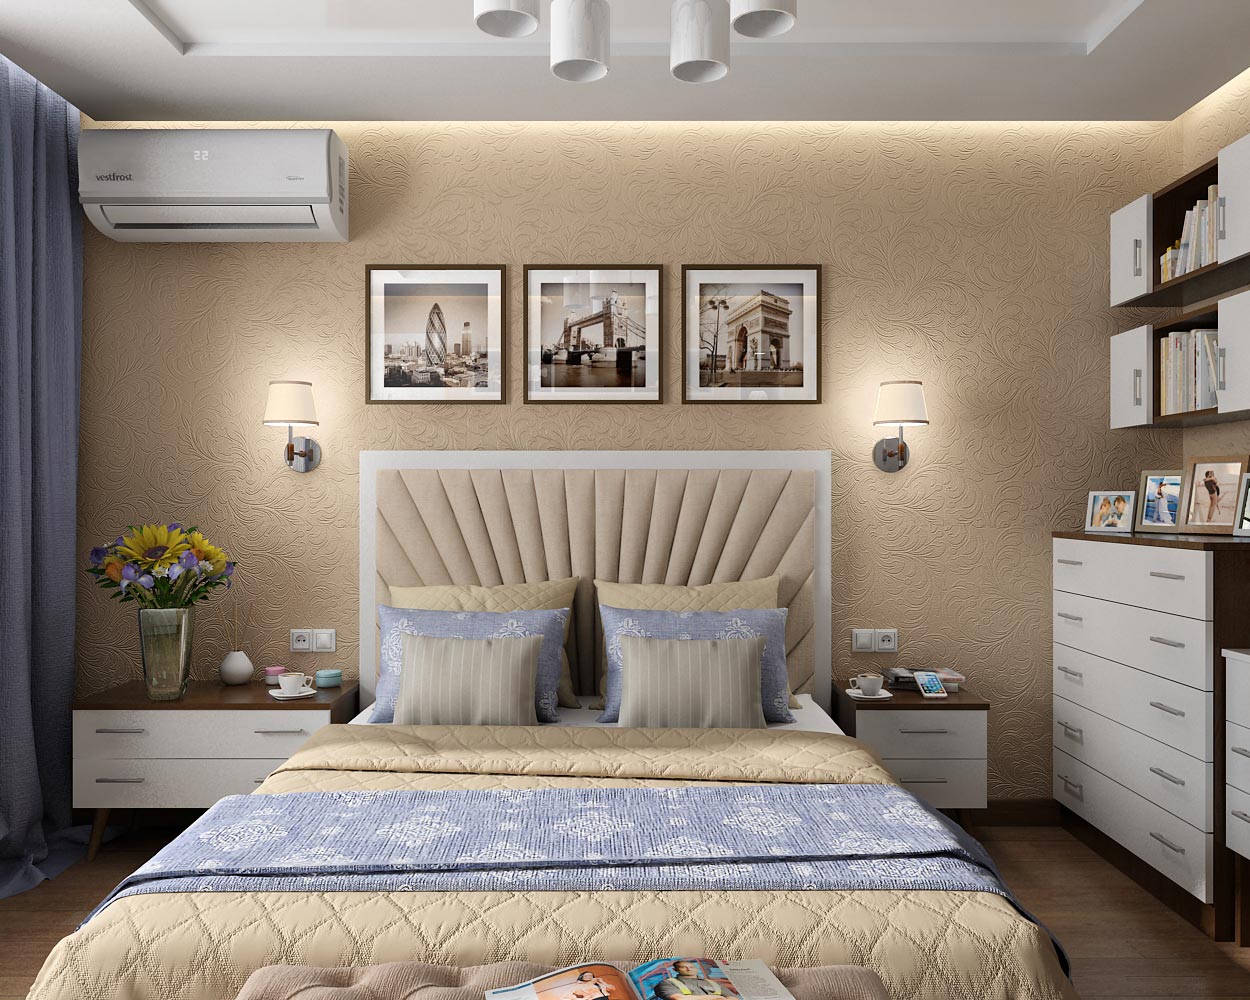 Interior design project for a bedroom in an apartment in Chernigov in 3d max vray 1.5 image